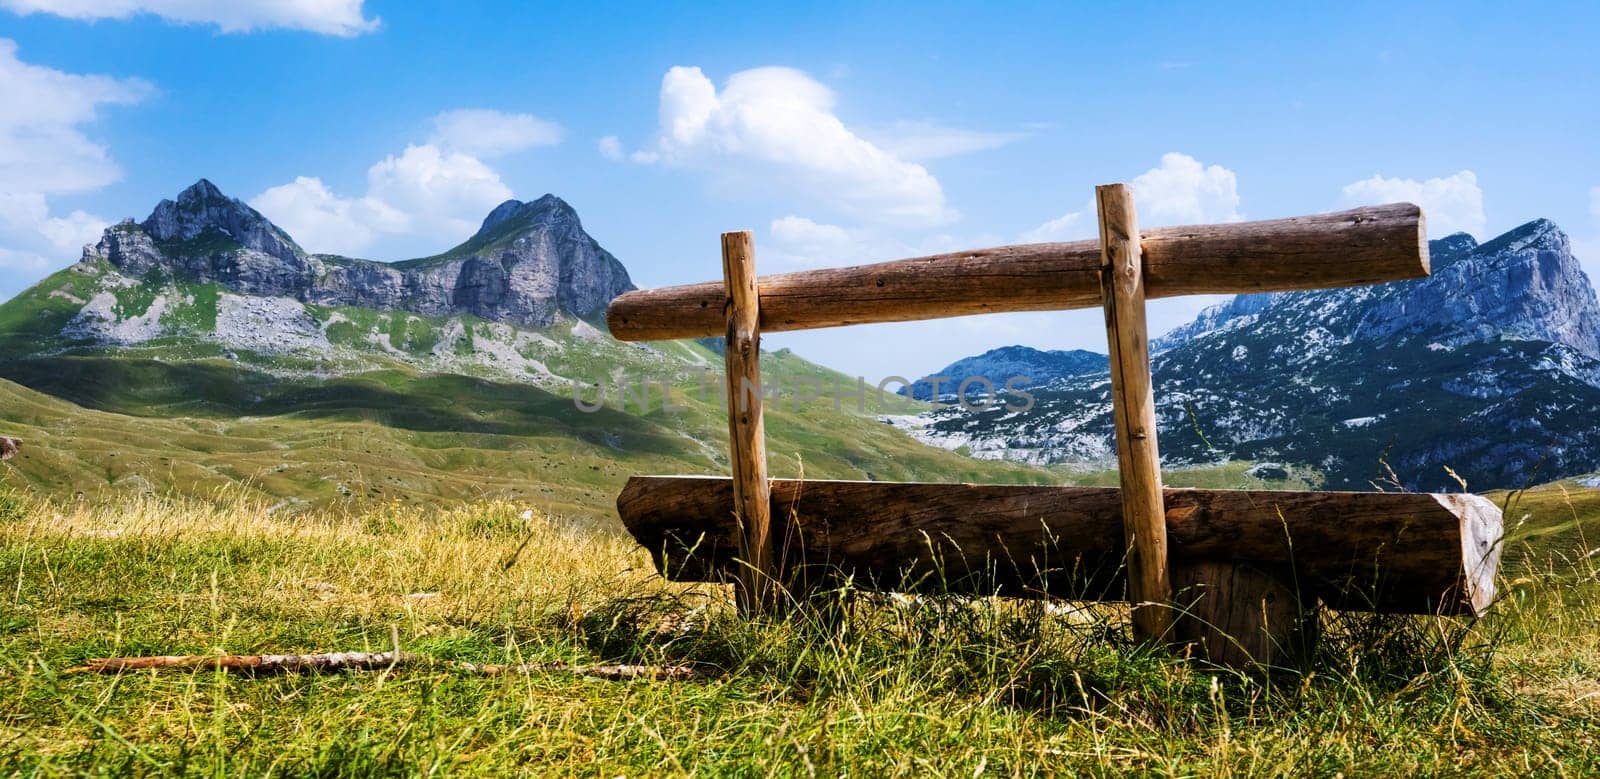 Scenic wooden bench in mountains of Montenegro in National park Durmitor. Amazing north balkan nature landscape in sunny summer day with blue sky and clouds